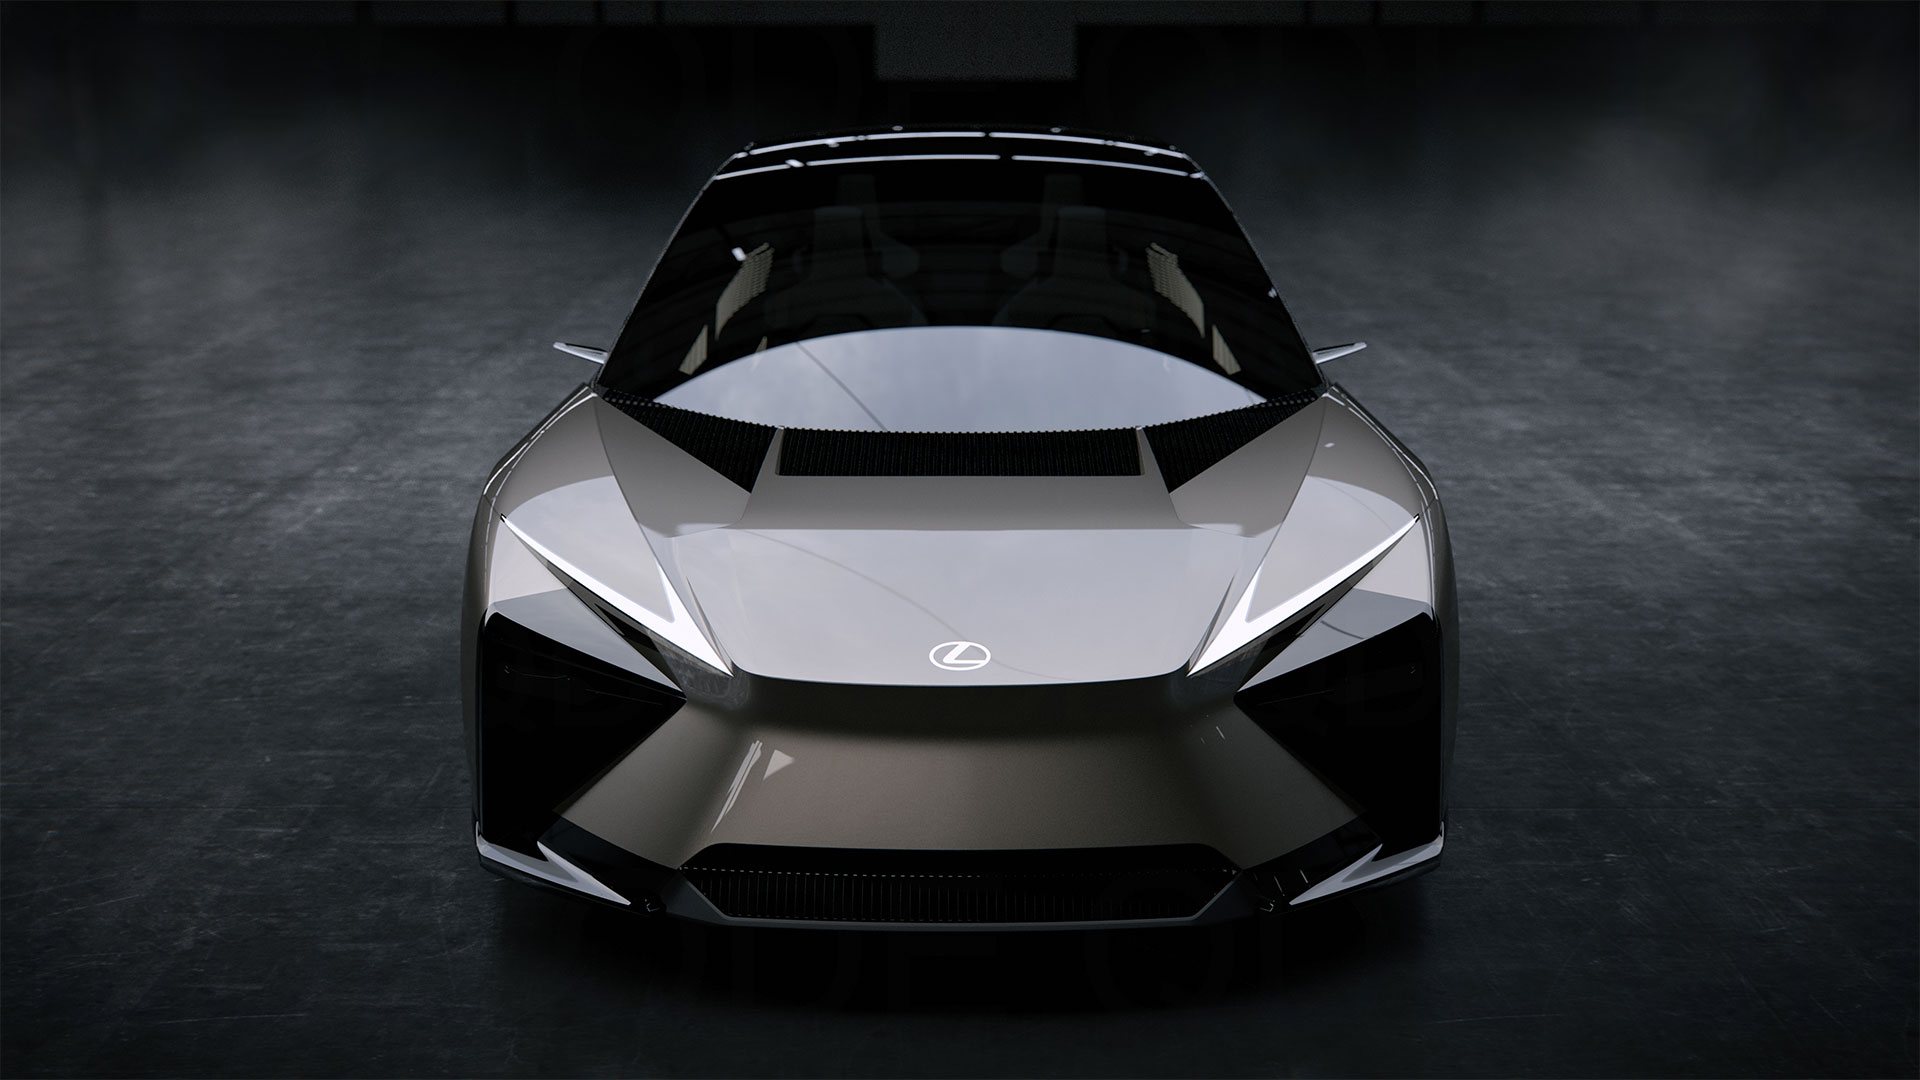 The Lexus LF-ZC Concept vehicle. Not available for purchase.